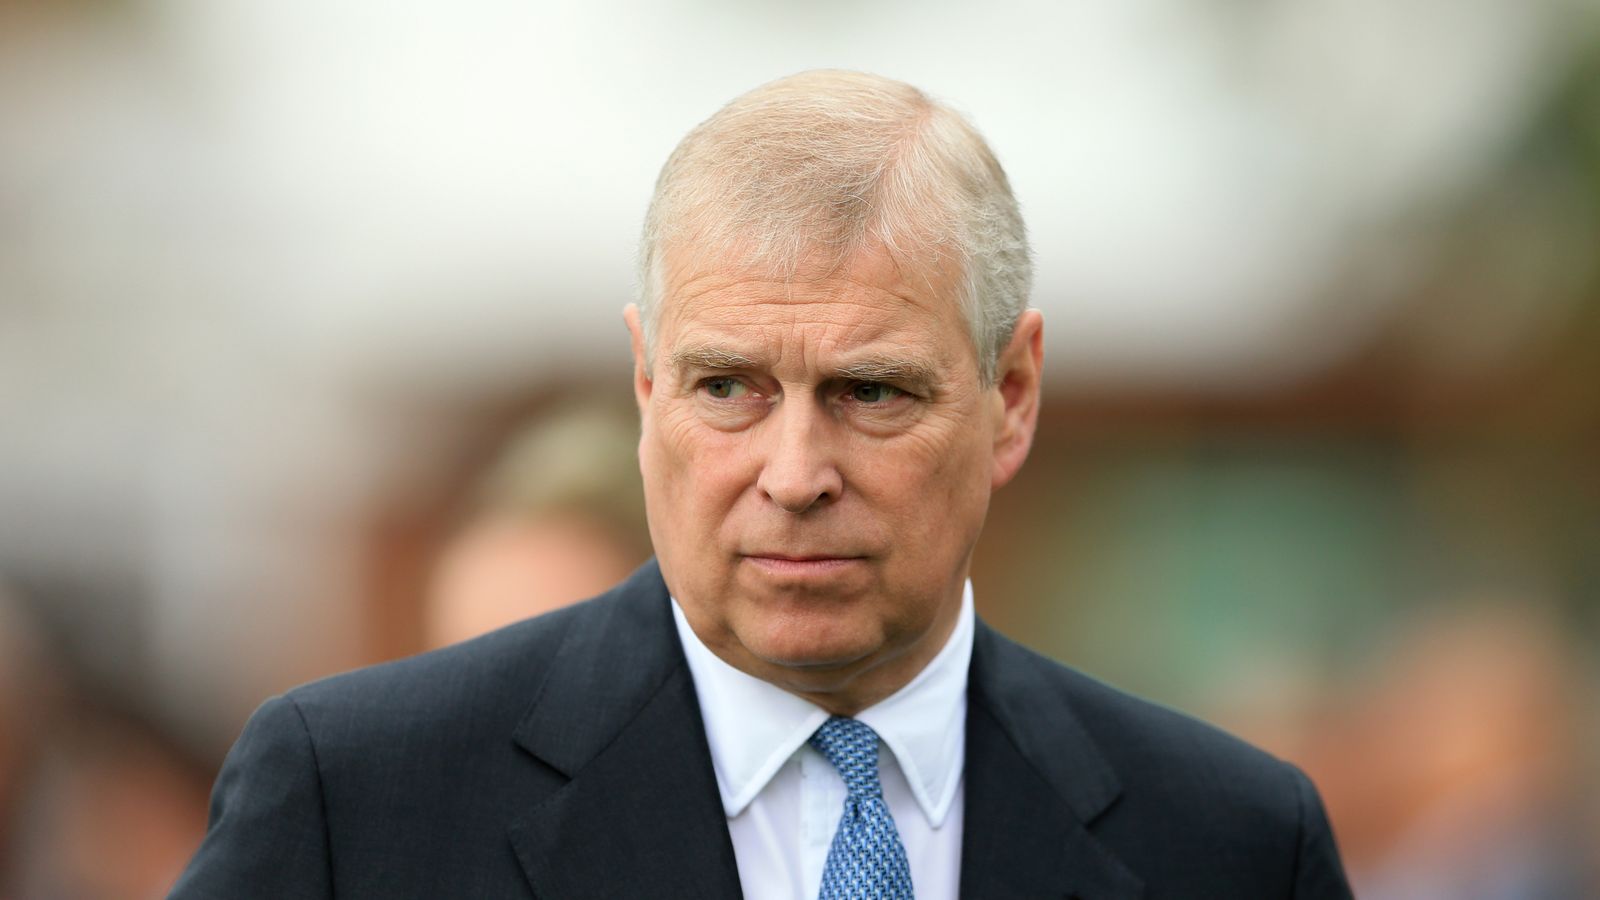 Prince Andrew scandal